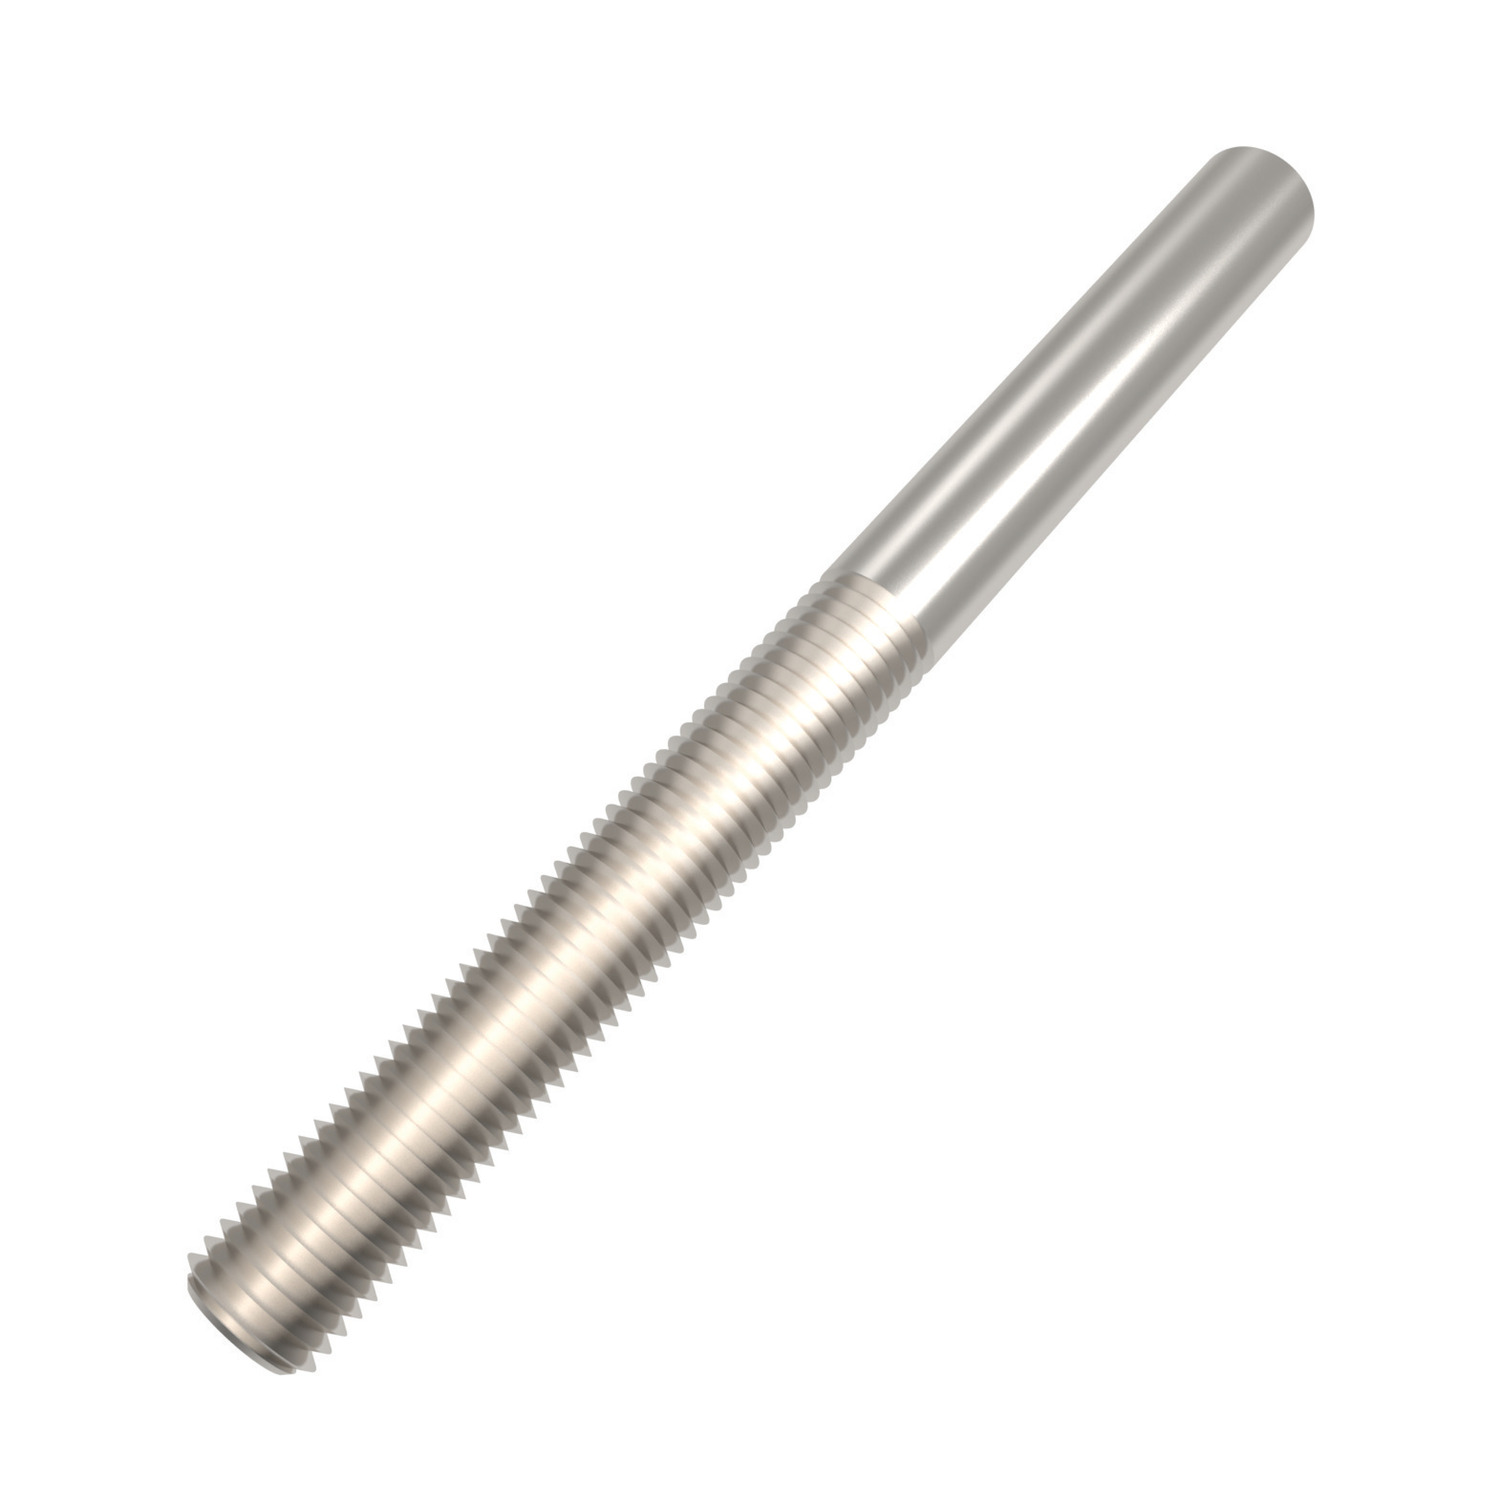 Product R3868, Welding Studs stainless steel / 